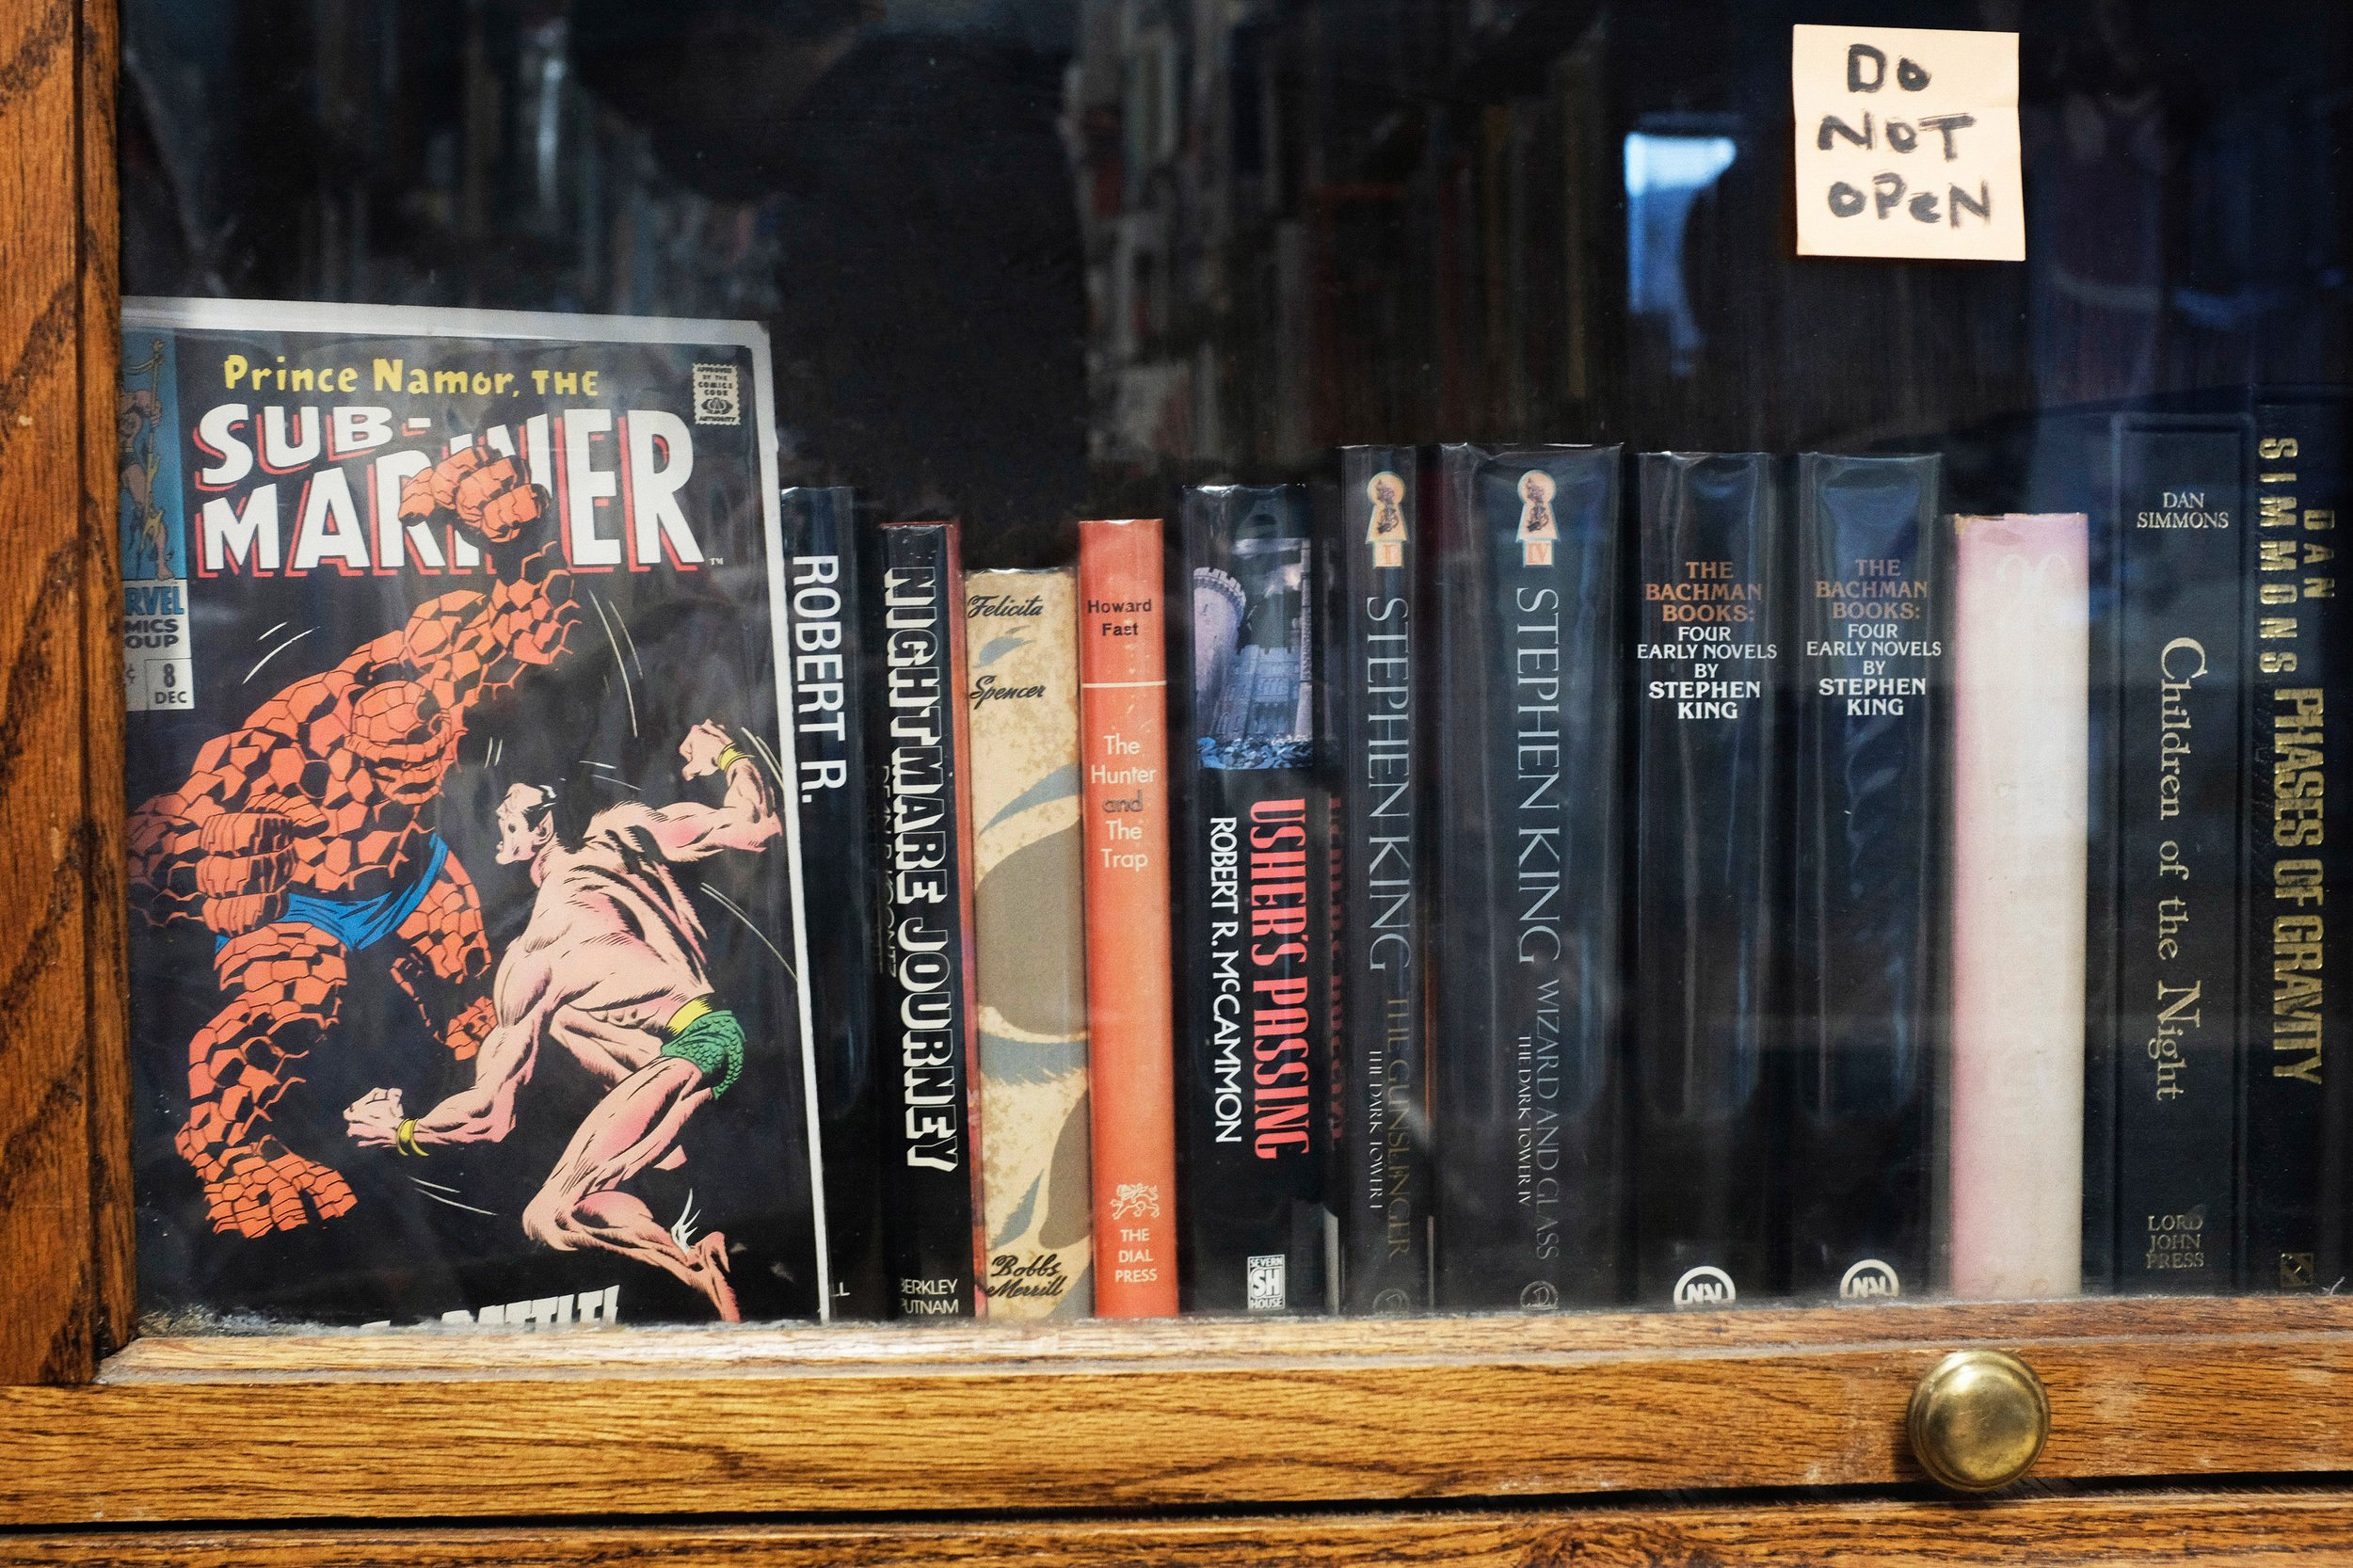  Behind a glass, in a locked book case sit the most rare and expensive books of the store. Featured in this shelf is a Marvel comic book, Prince Namor, The Sub Mariner, which is in mint condition. Next to the comic are novels by Stephen King and Dan 